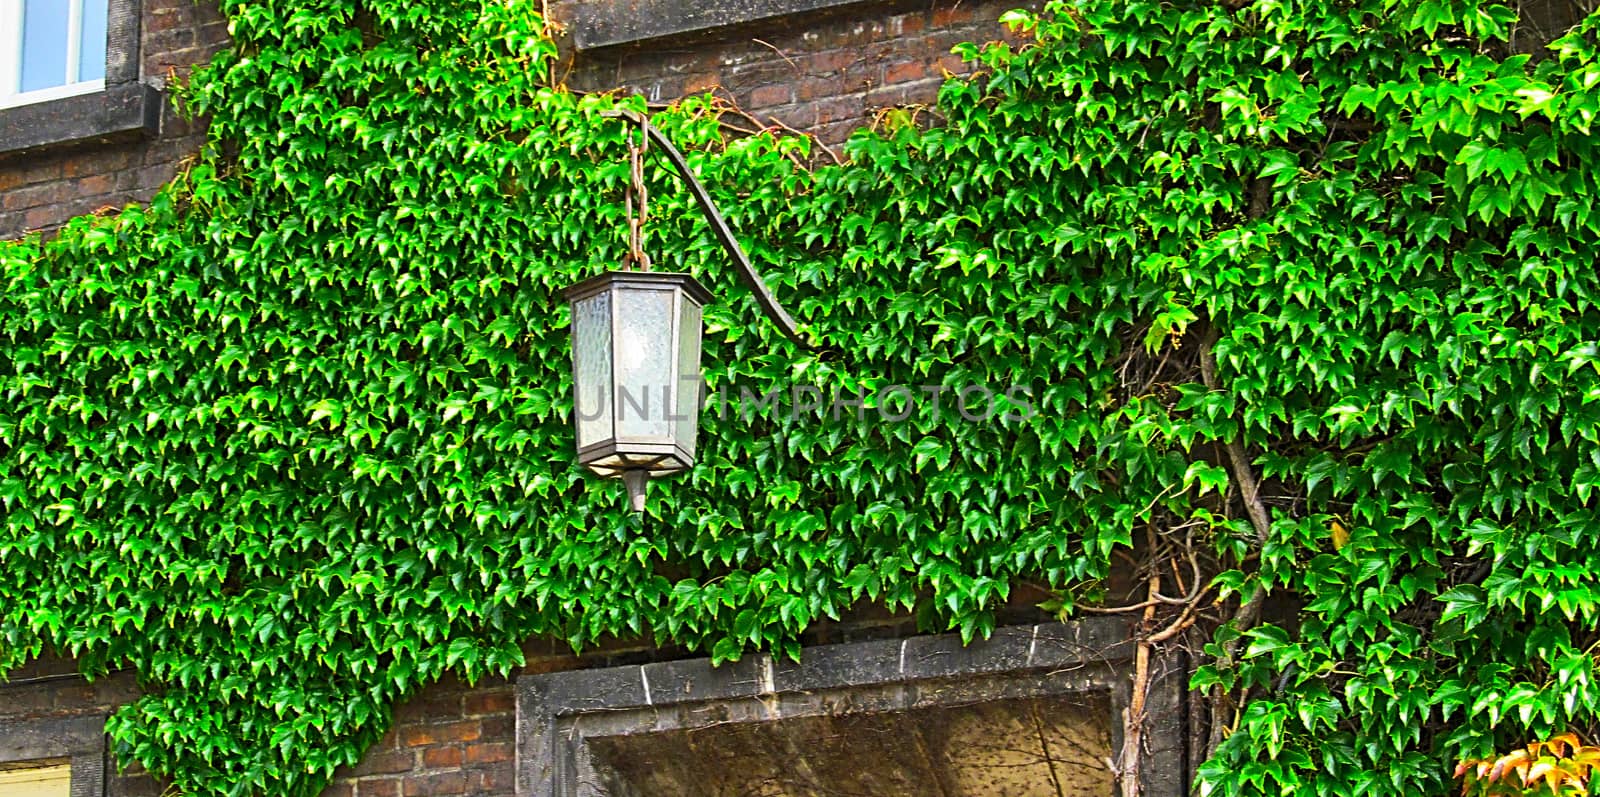 Lantern and plant climbing on the wall                               